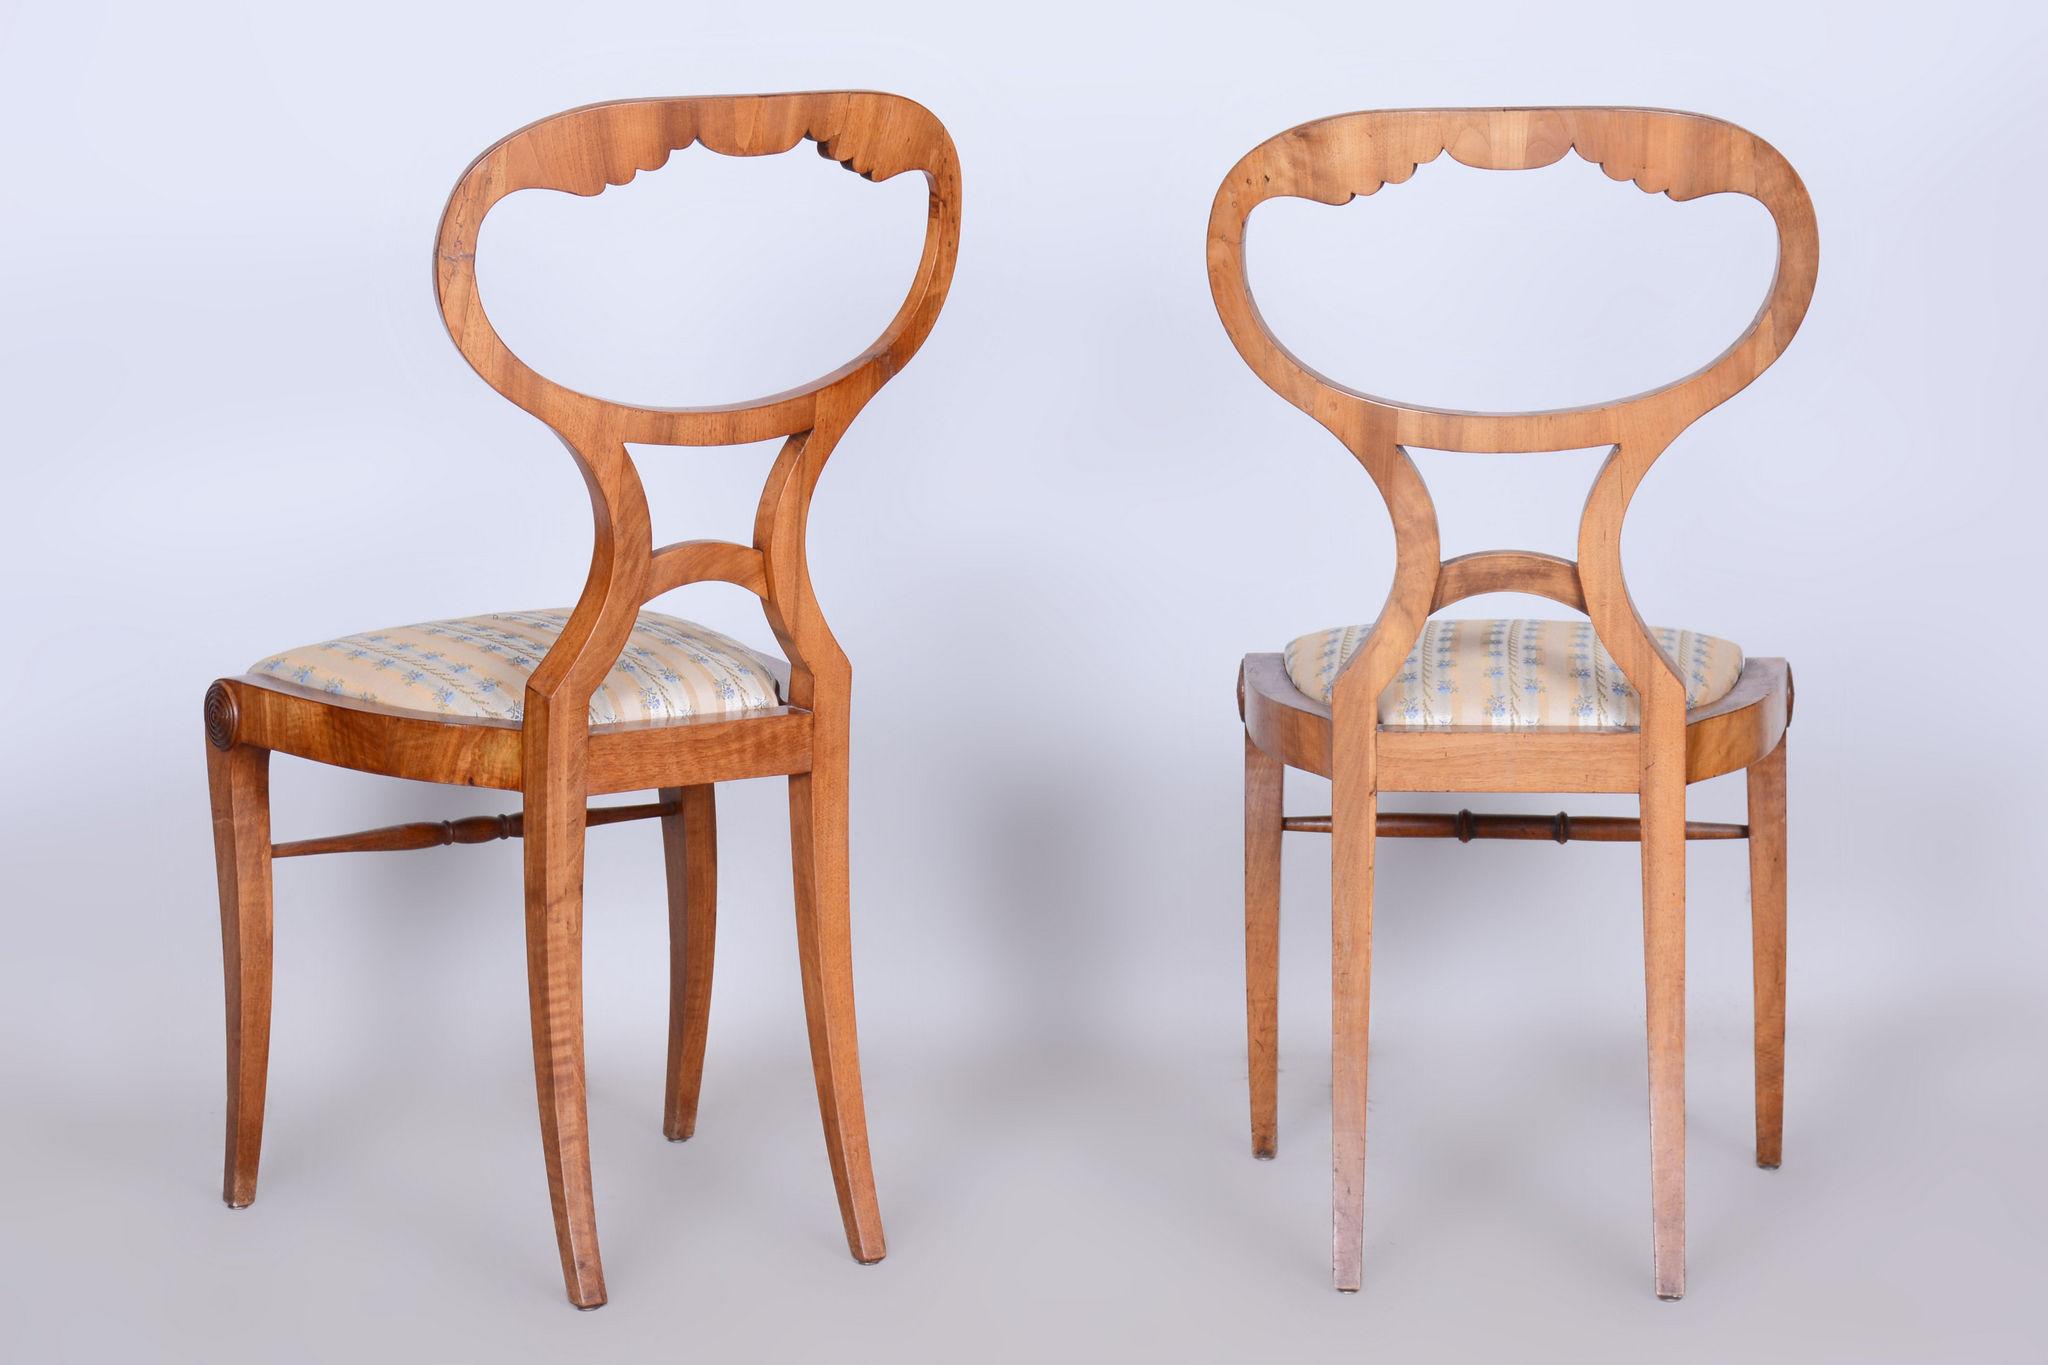 Restored Biedermeier Set of Four Chairs. Filigree Viennese chair model.

Source: Vienna, Austria
Period: 1820-1829
Material: Solid Oak, Walnut Veneer, Fabric

Stable construction in perfect condition.
Revived polish.
Very well-preserved